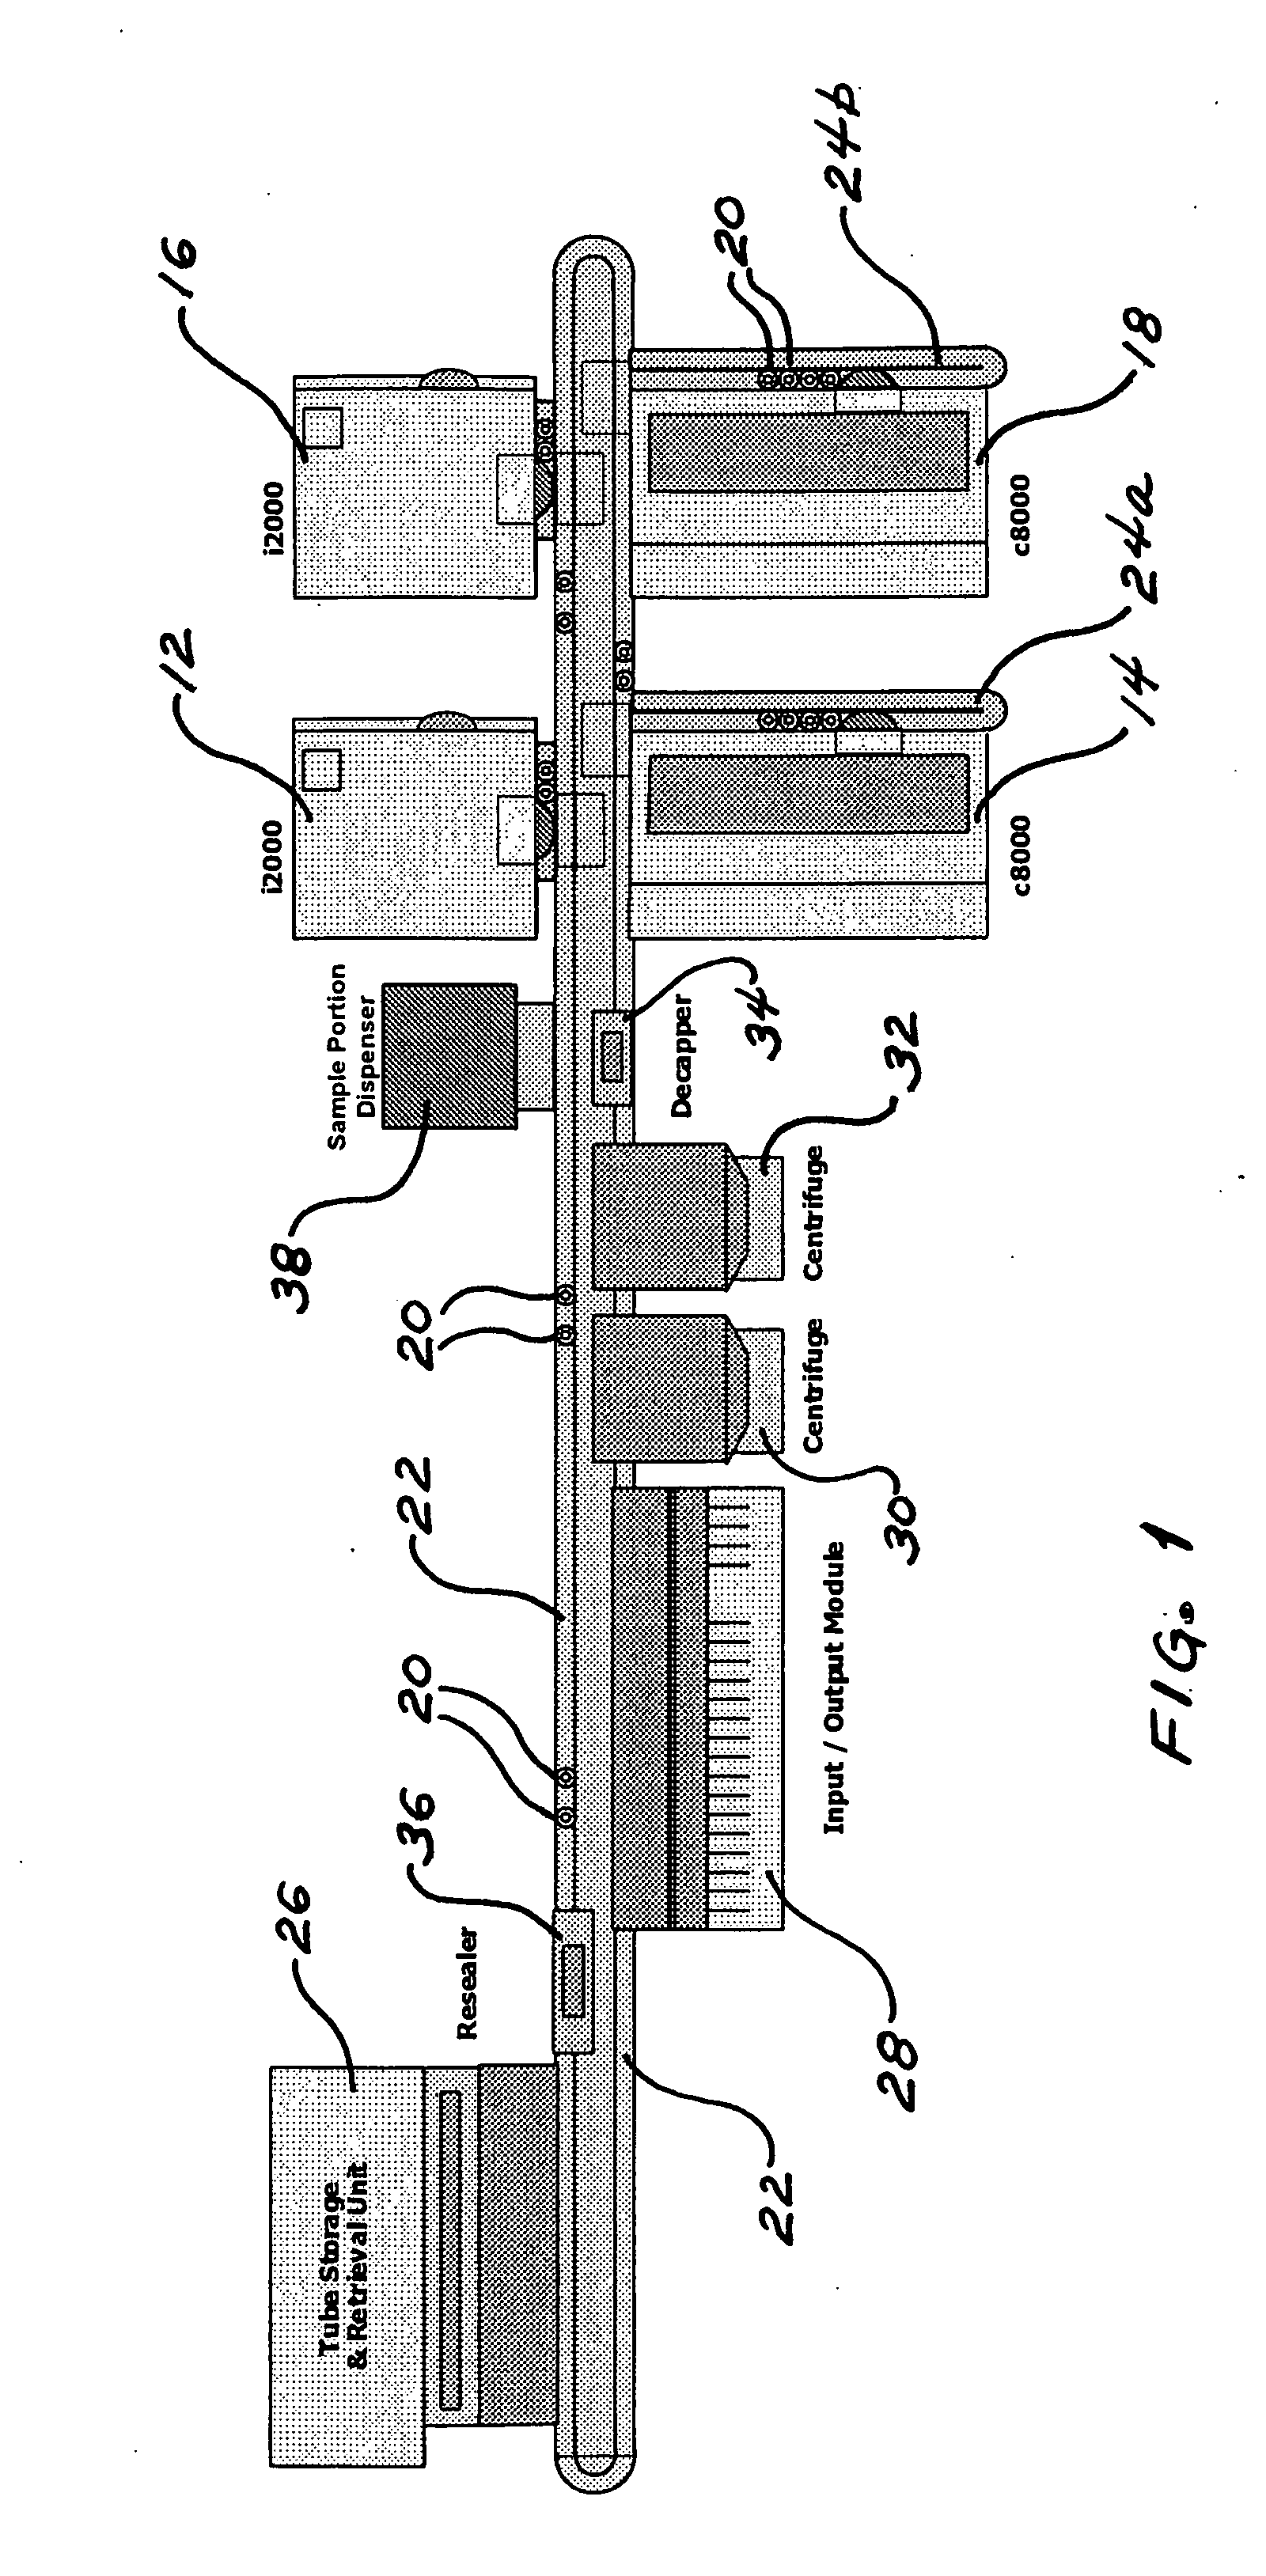 Method for determining the order of execution of assays of a sample in a laboratory automation system